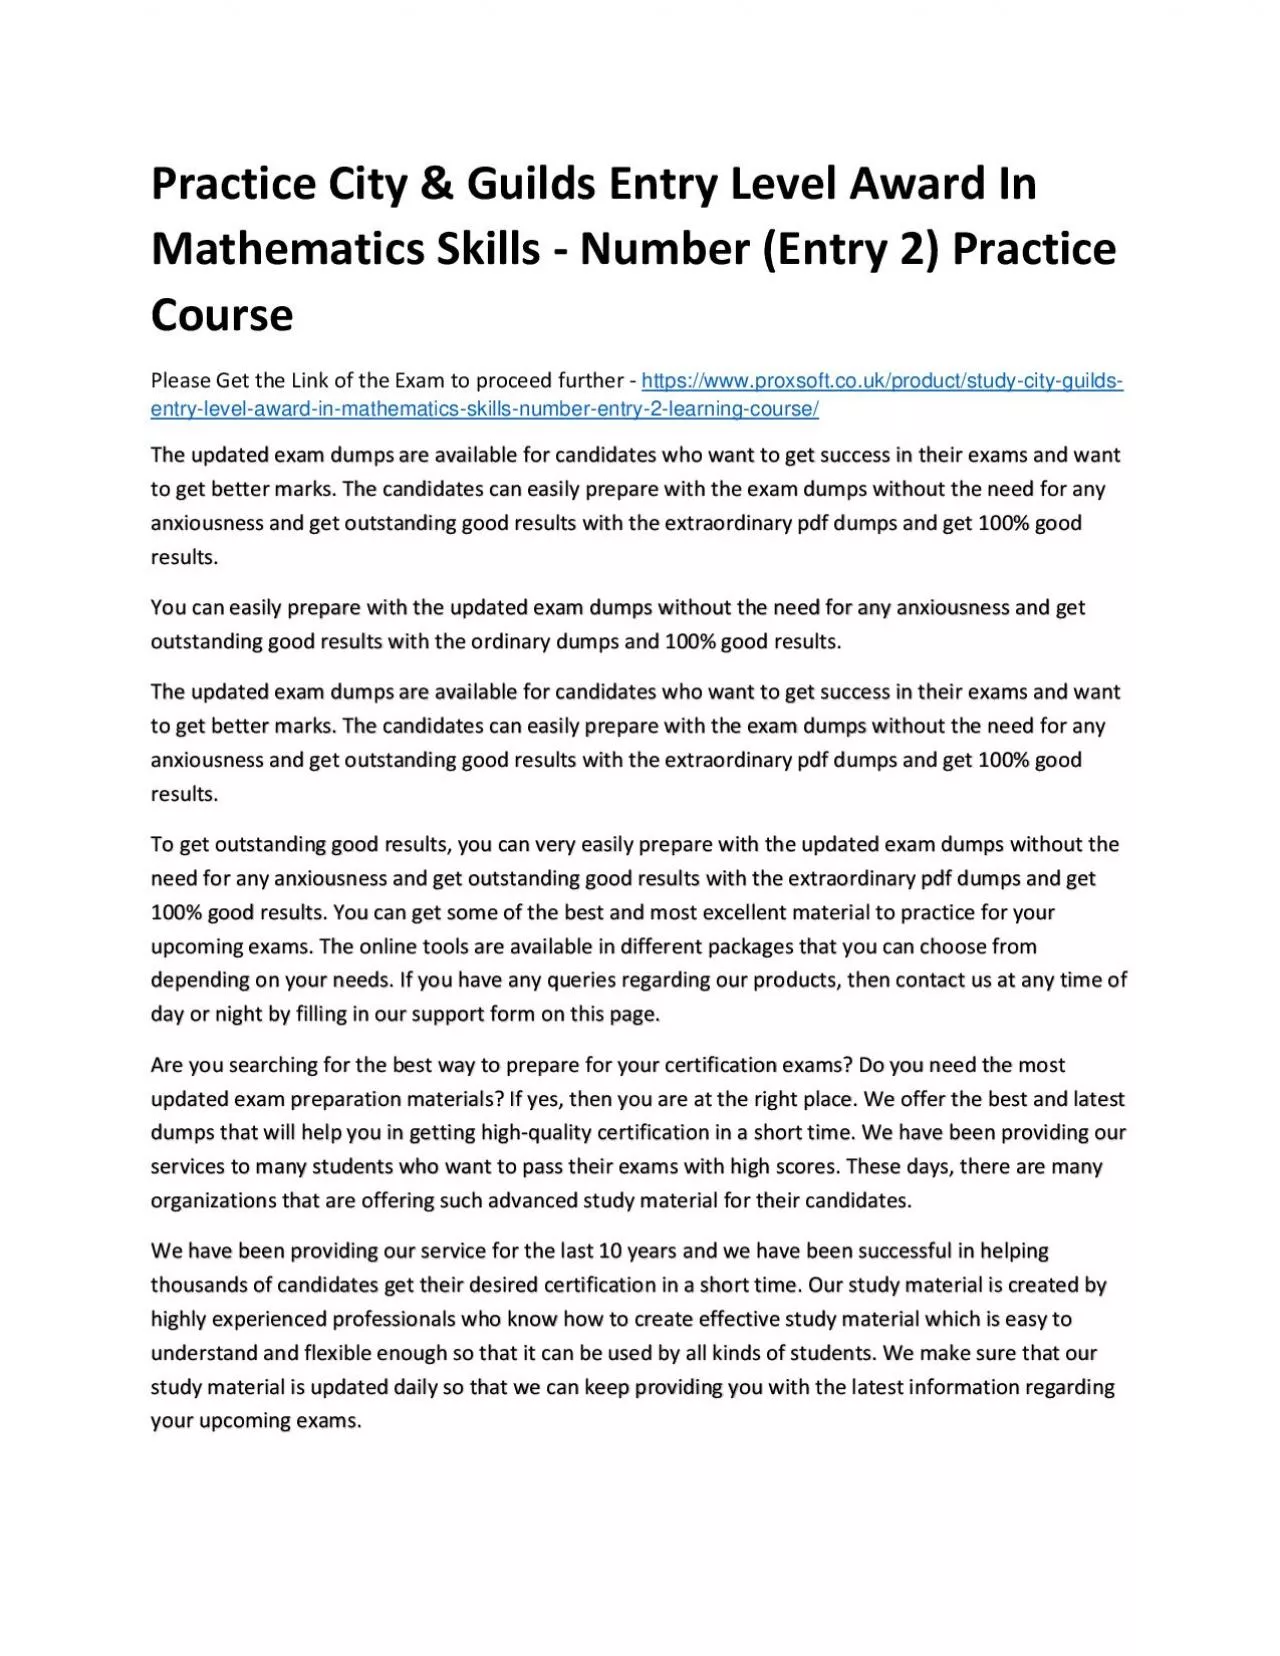 Practice City & Guilds Entry Level Award In Mathematics Skills - Number (Entry 2) Practice